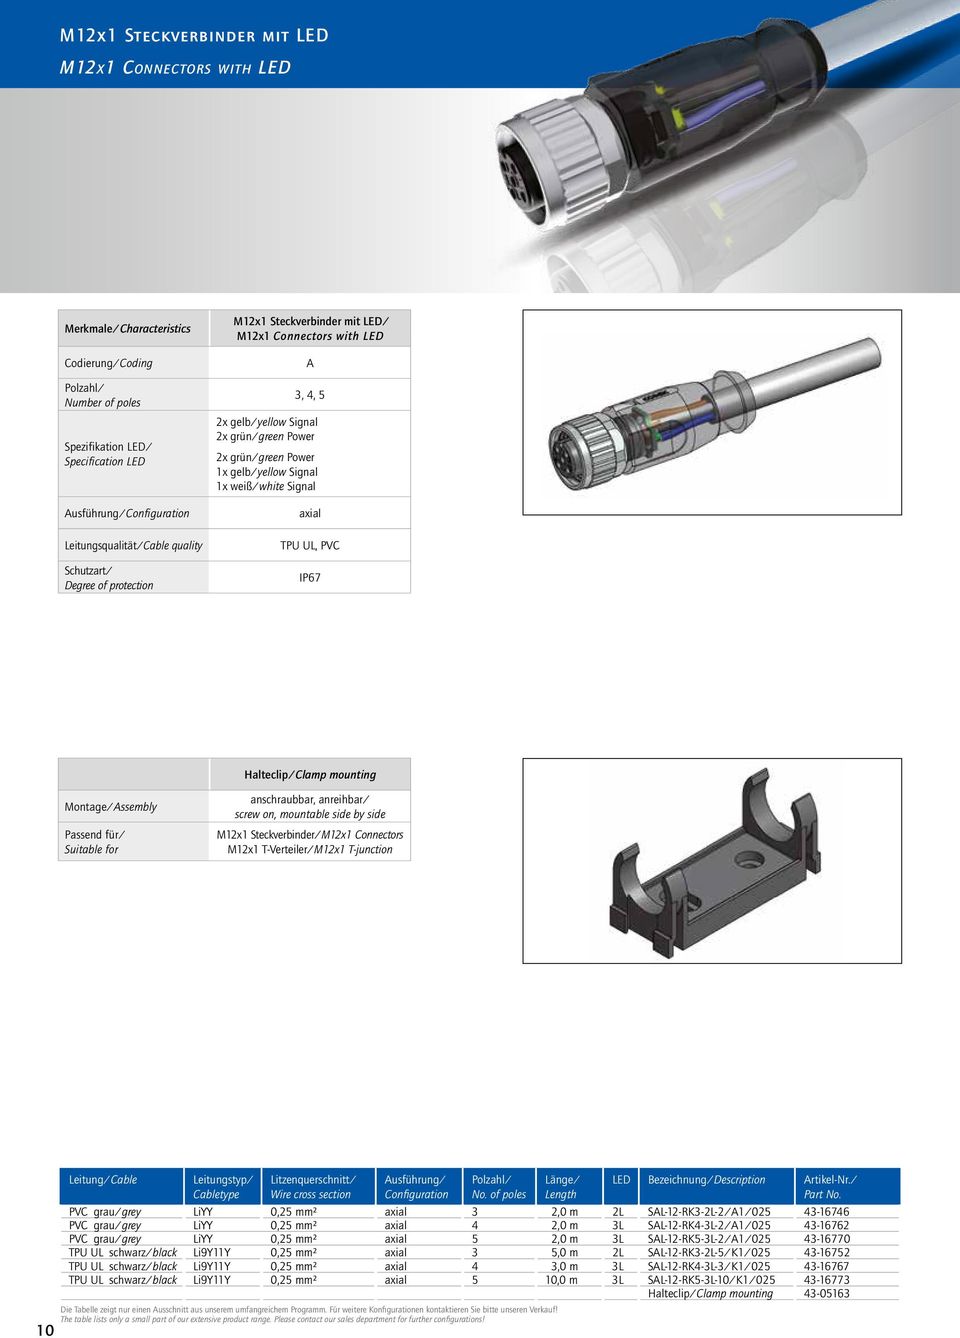 mounting Montage/Assembly Passend für/ Suitable for anschraubbar, anreihbar/ screw on, mountable side by side M12x1 Steckverbinder/M12x1 Connectors M12x1 T-Verteiler/M12x1 T-junction 10 Leitung/Cable